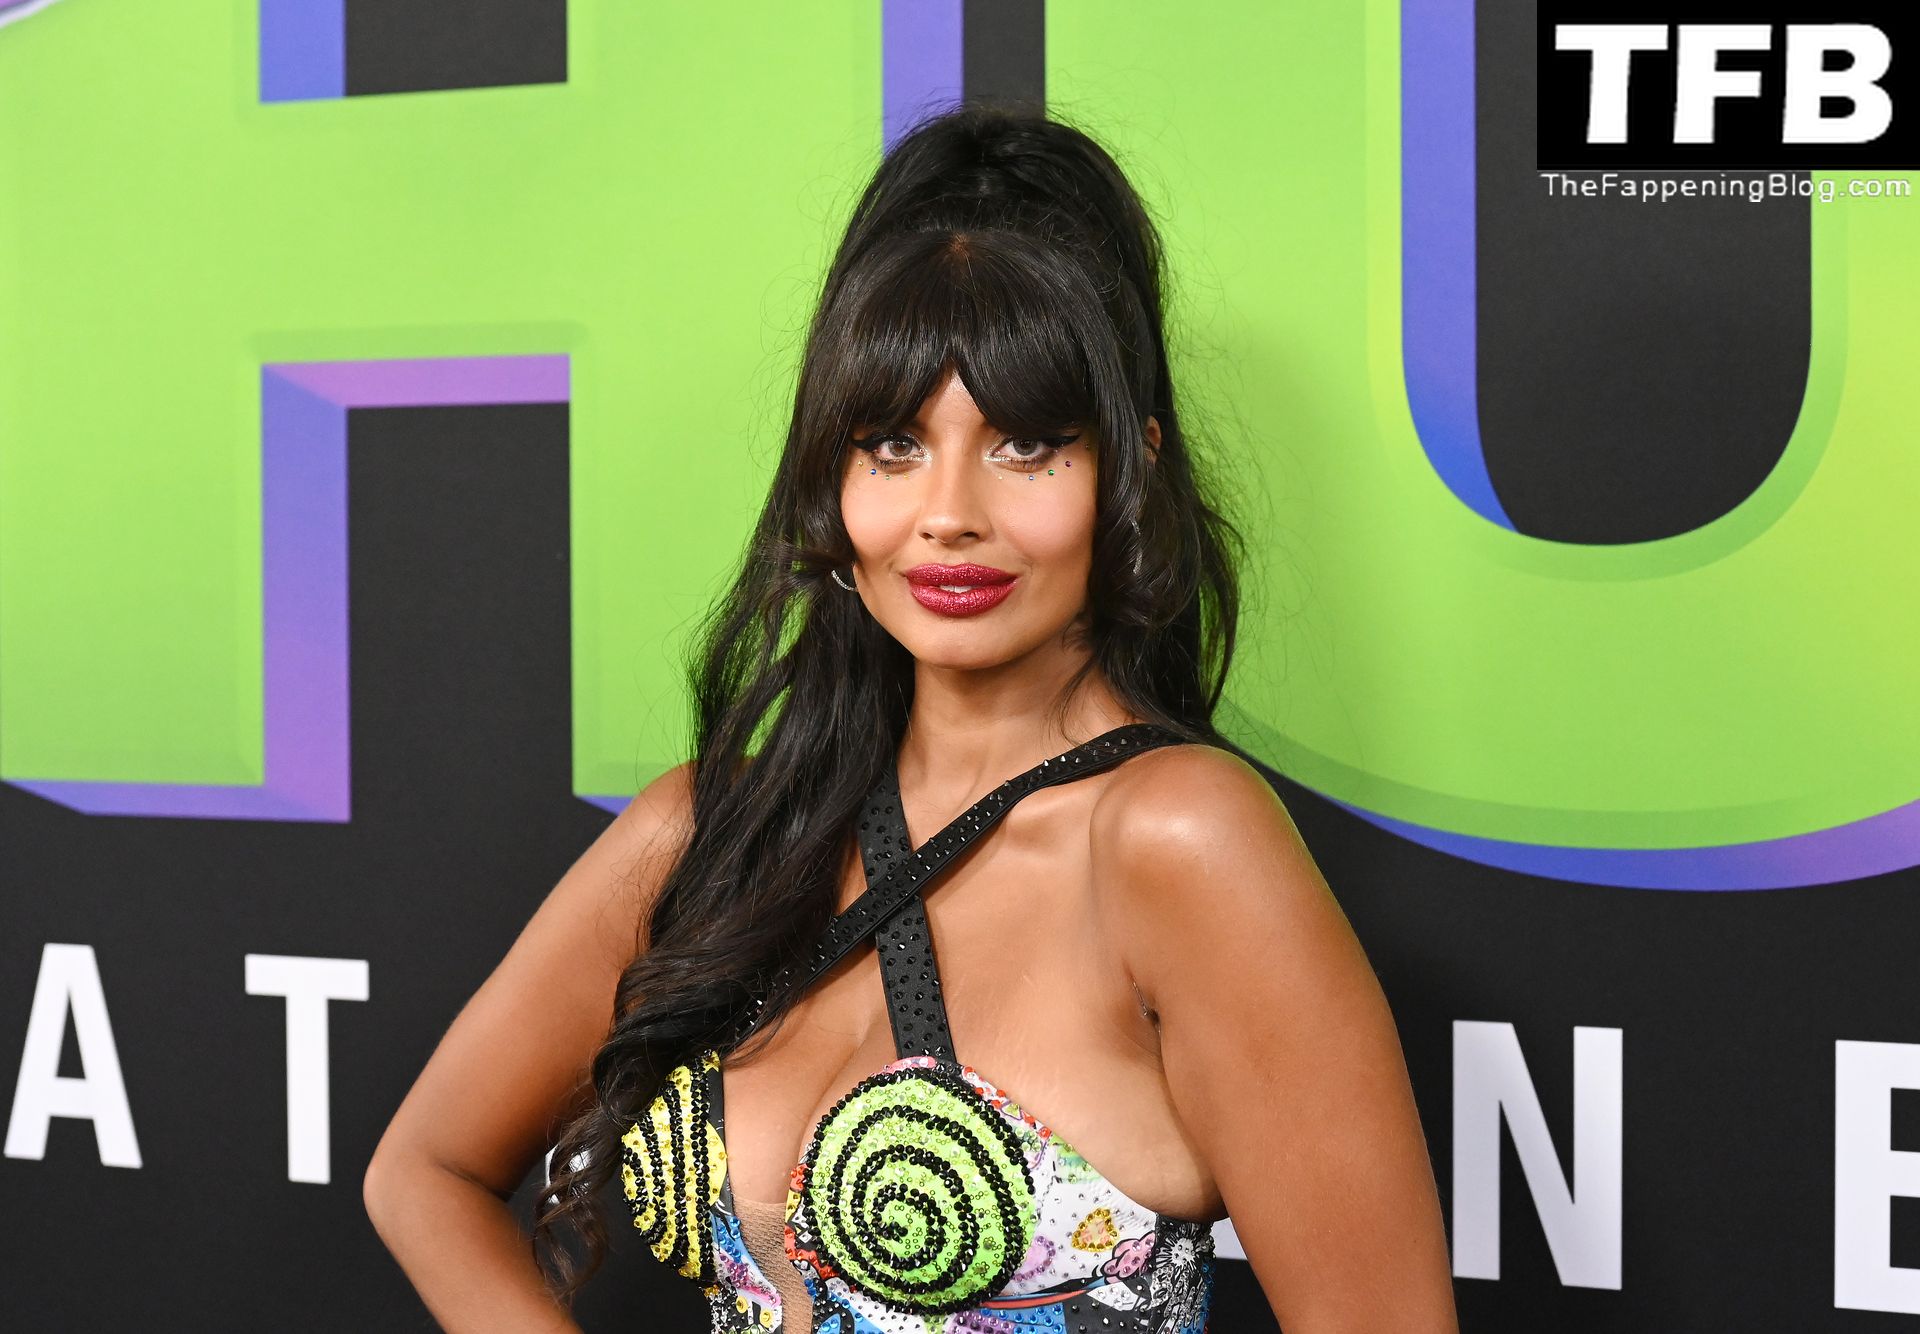 Jameela Jamil Sexy The Fappening Blog 37 - Jameela Jamil Flaunts Her Big Tits at the Premiere of Disney+’s “She Hulk: Attorney at Law” in LA (53 Photos)